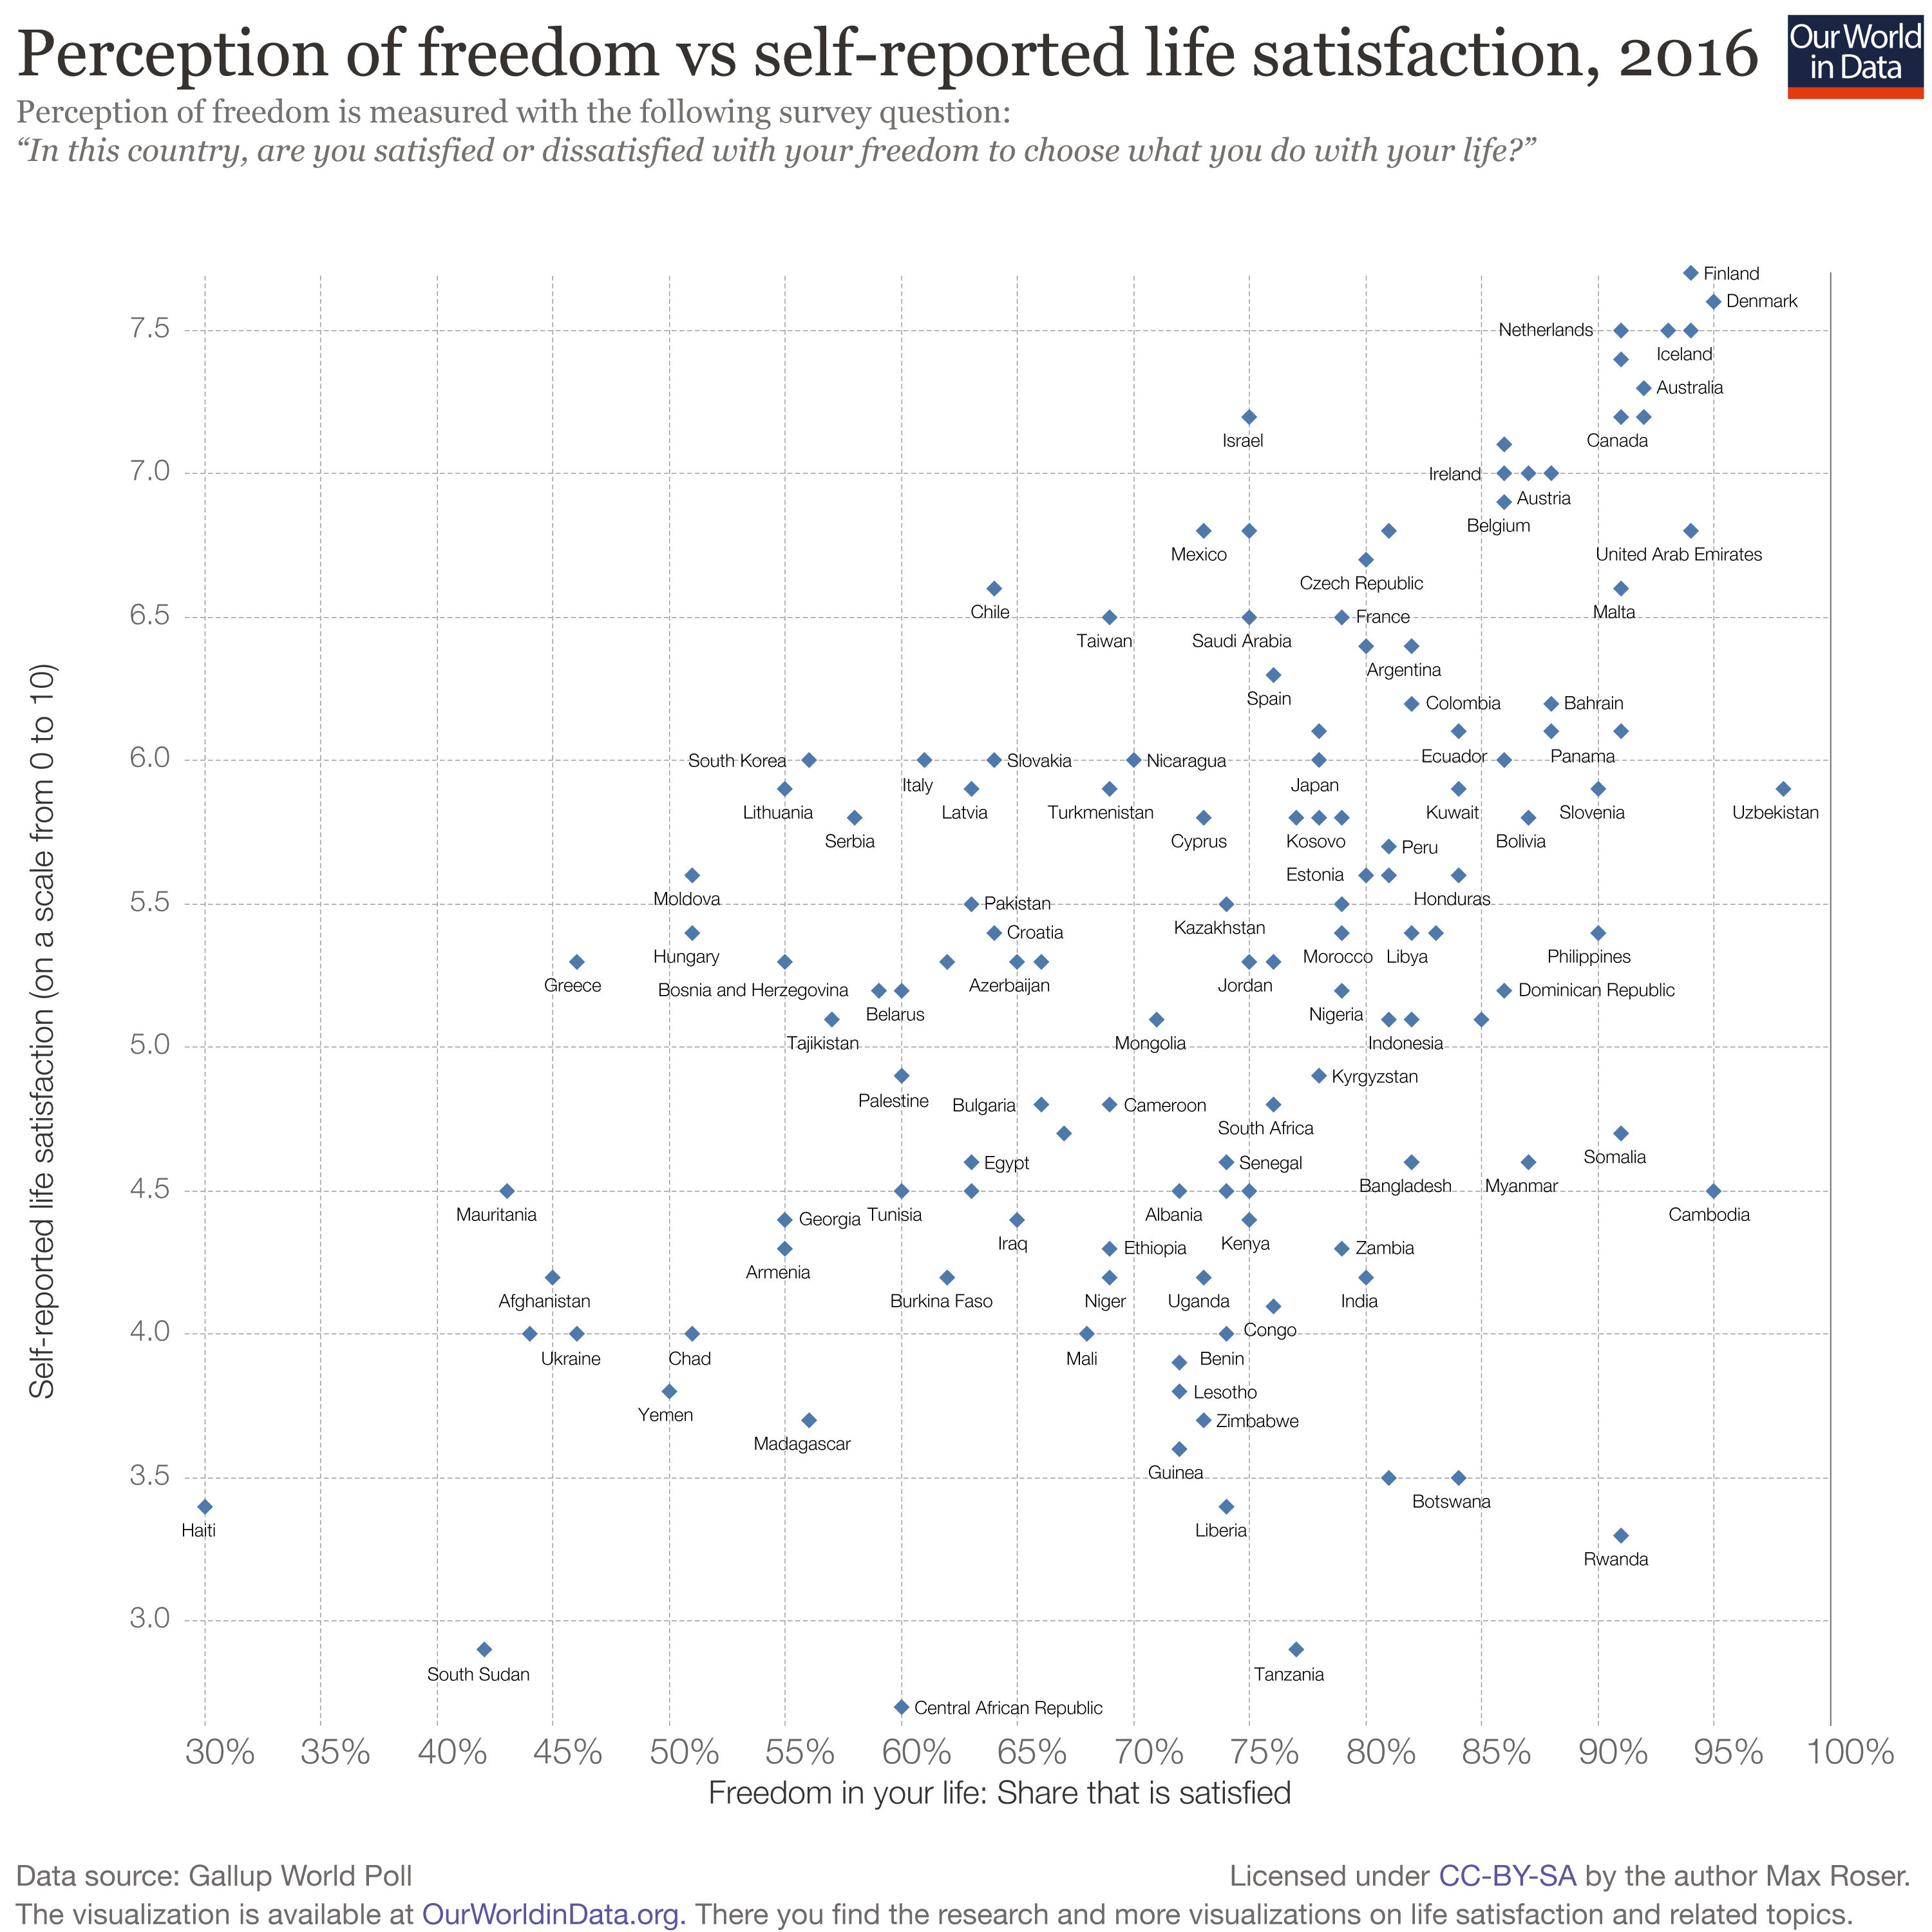 Perception of freedom vs. self-reported life satisfaction, 2016